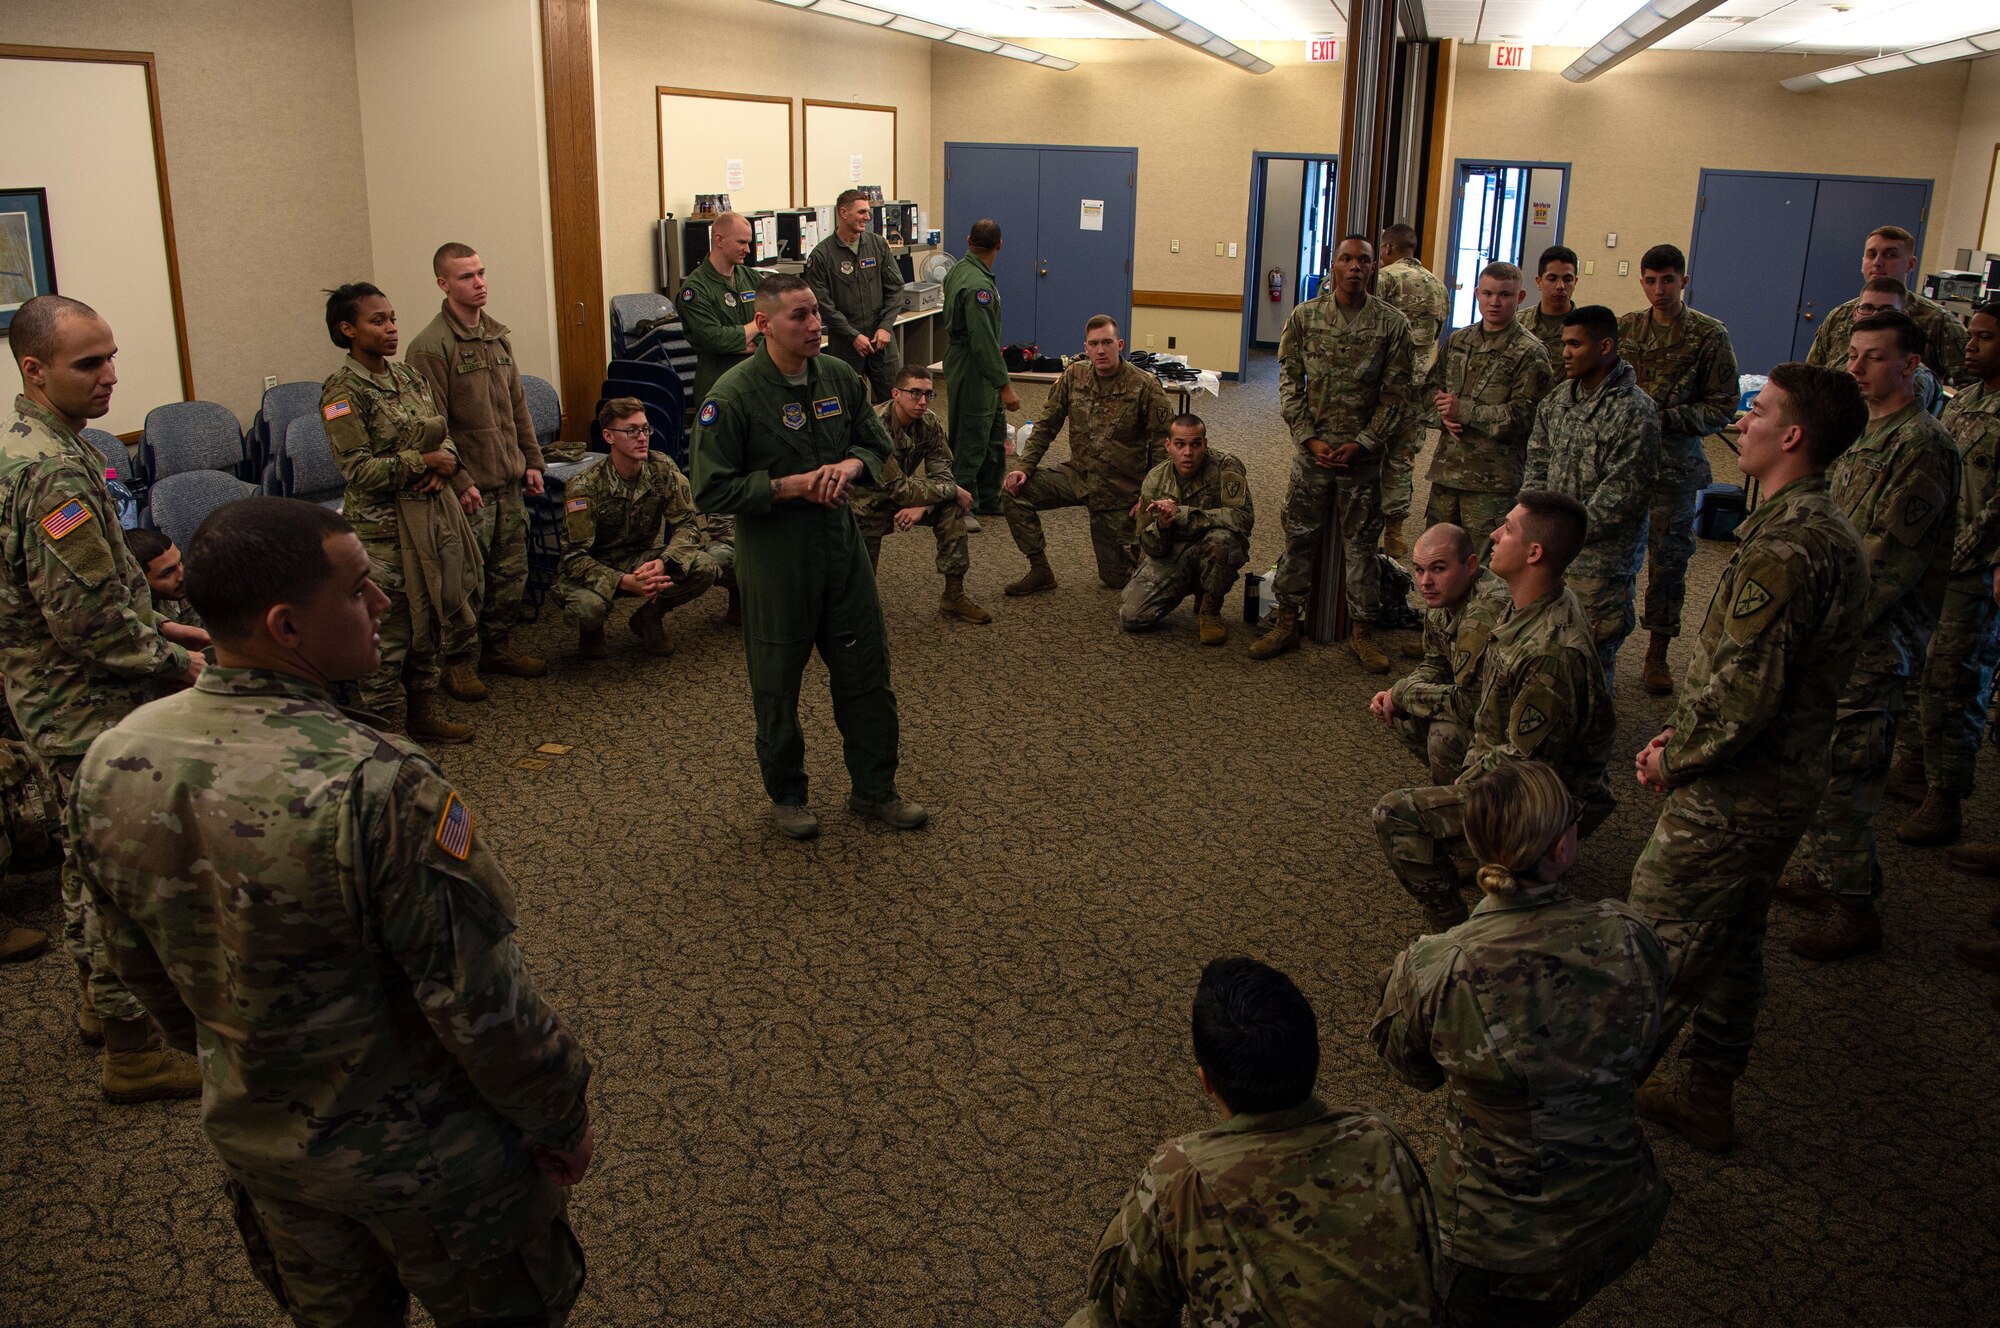 Master Sgt. Joseph Sorreno, 627th Security Forces Squadron Phoenix Ravens program manager, teaches a course on how to process and hold detainees to 595th Military Police Company, 508th Military Police Battalion Soldiers at Joint Base Lewis-McChord, Wash., Dec. 5, 2019. The Soldiers are deploying and their battalion decided to use the Air Force to cross train and see how the Air Force load and unload detainees. (U.S. Air Force photo by Senior Airman Tryphena Mayhugh)